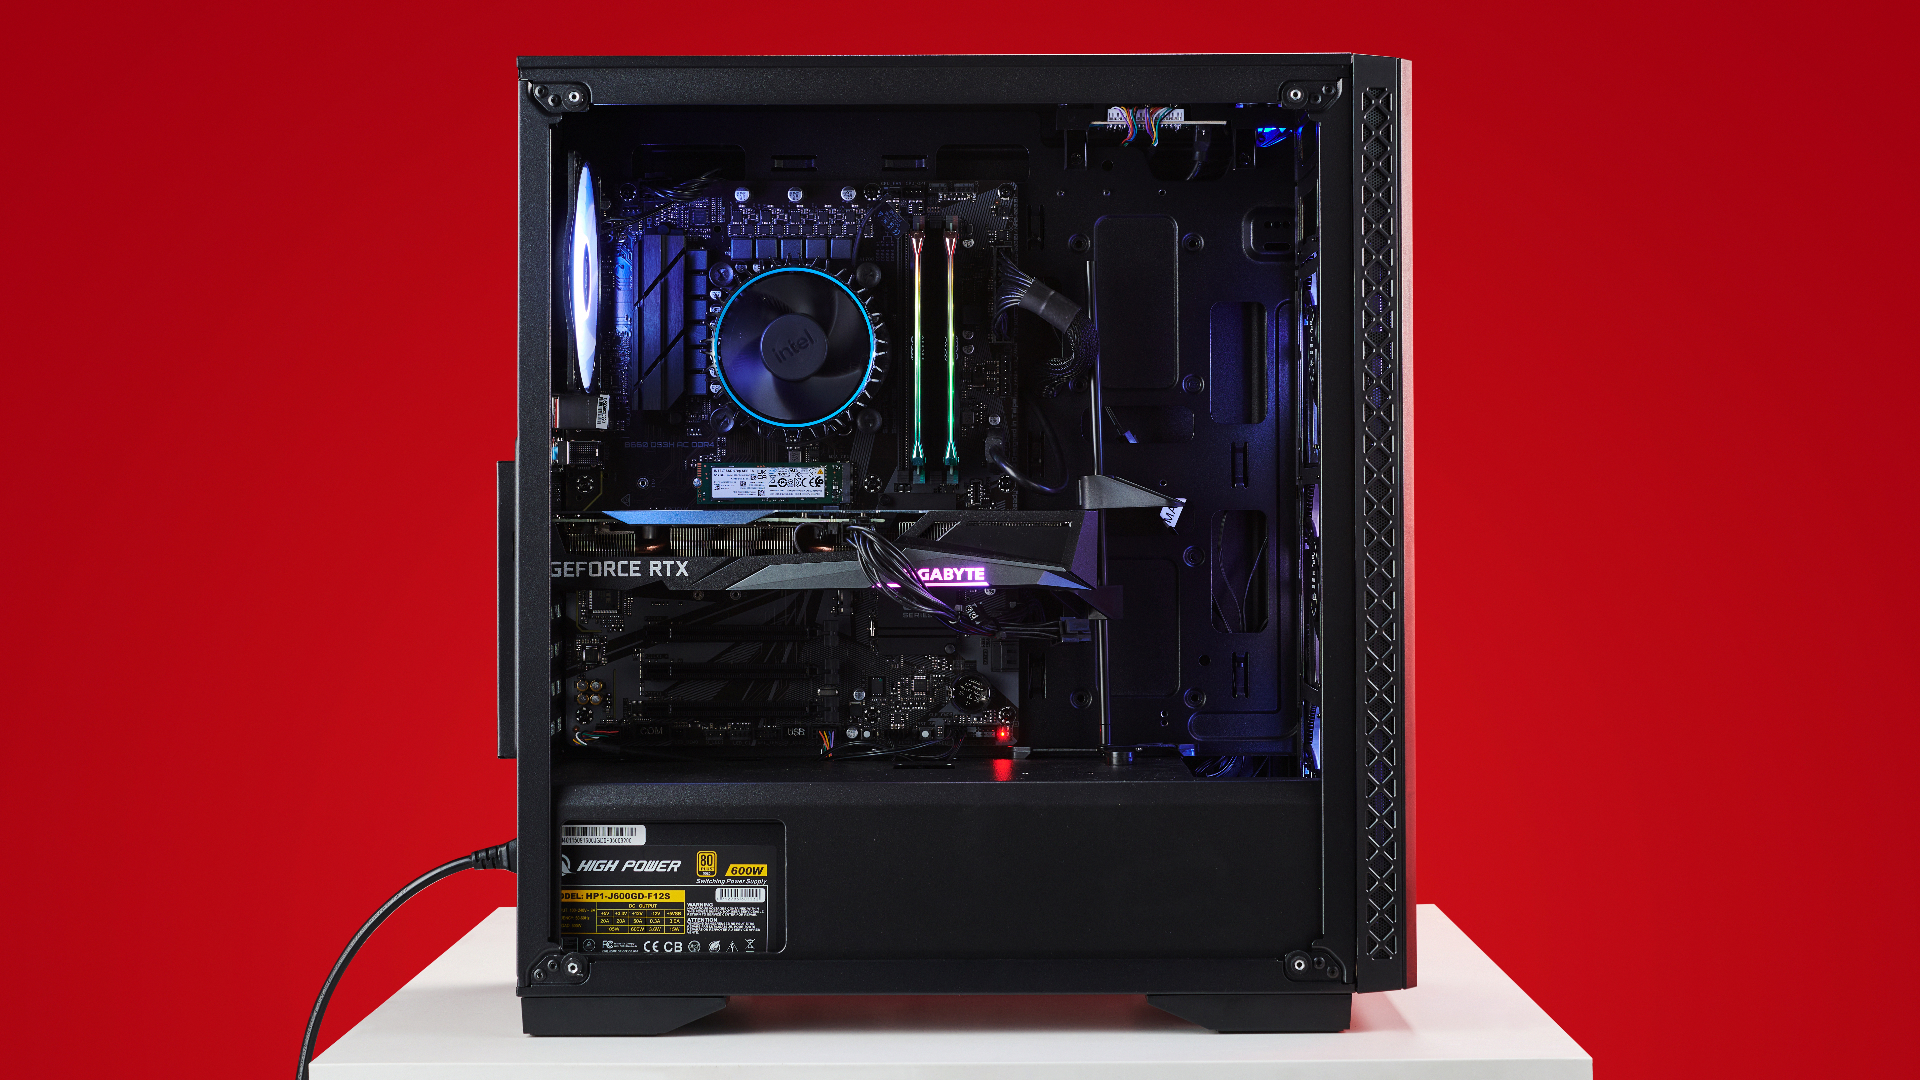 The ABS gaming PC side internals view on red.